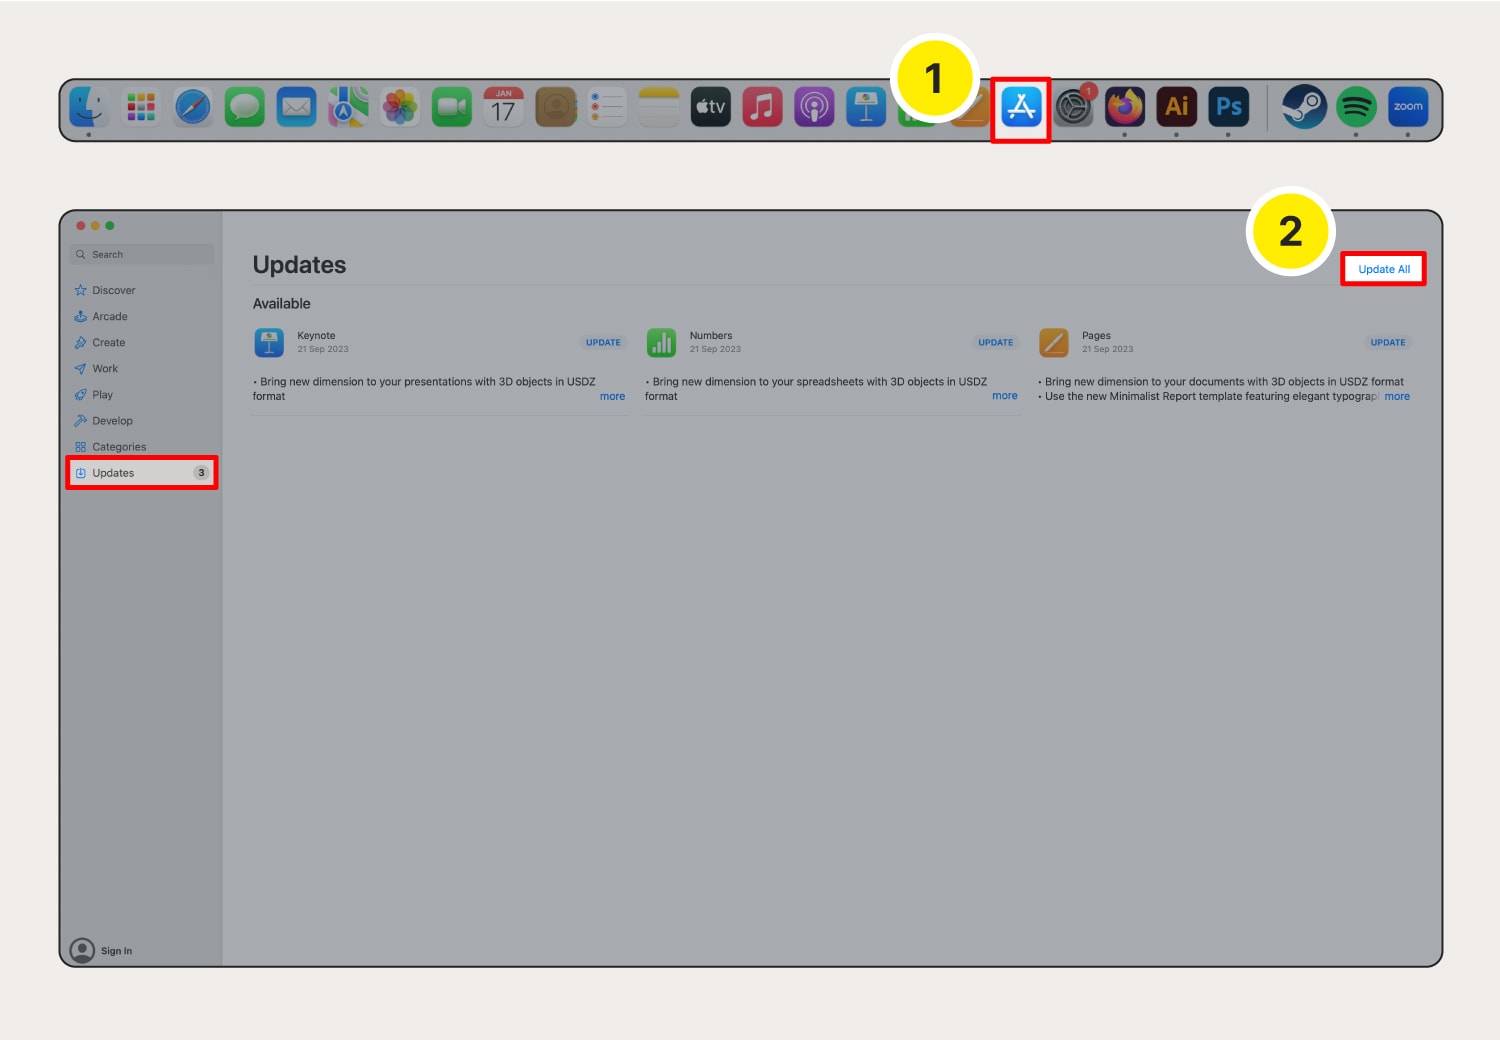 Screenshot showing how to install software updates on Mac.